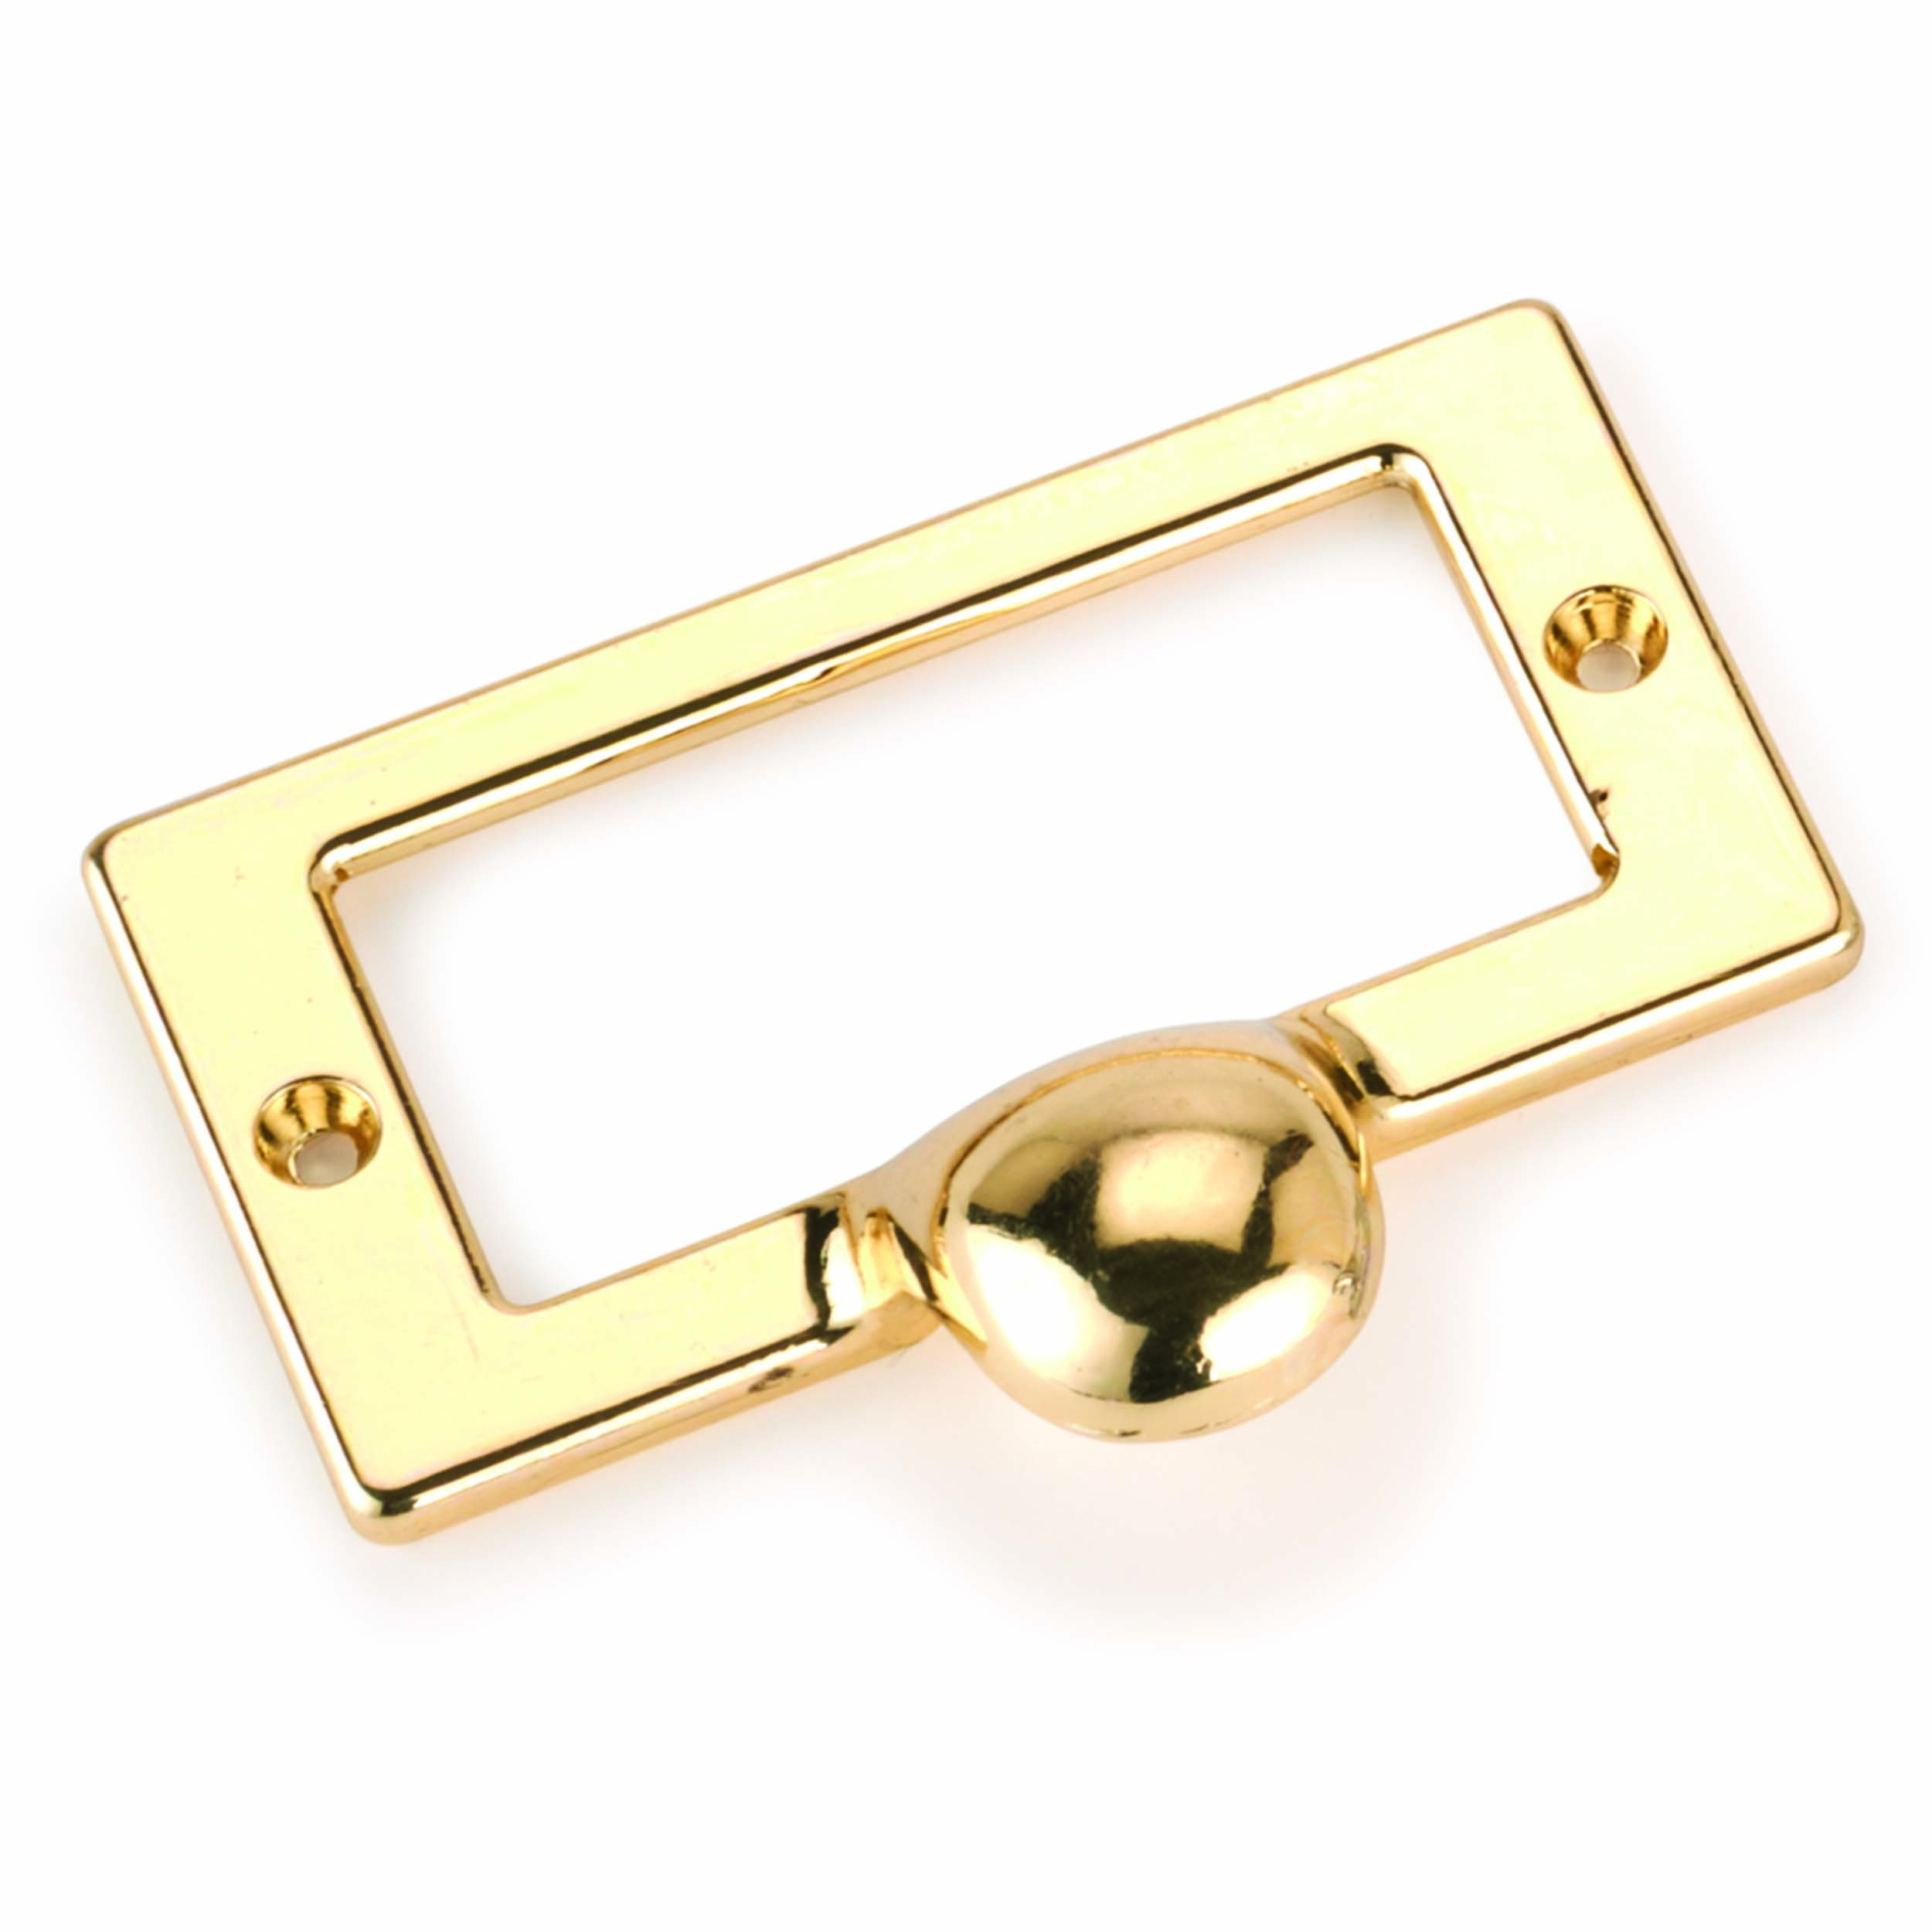 Drawer Pull With Card Holder, Polished Brass Finish